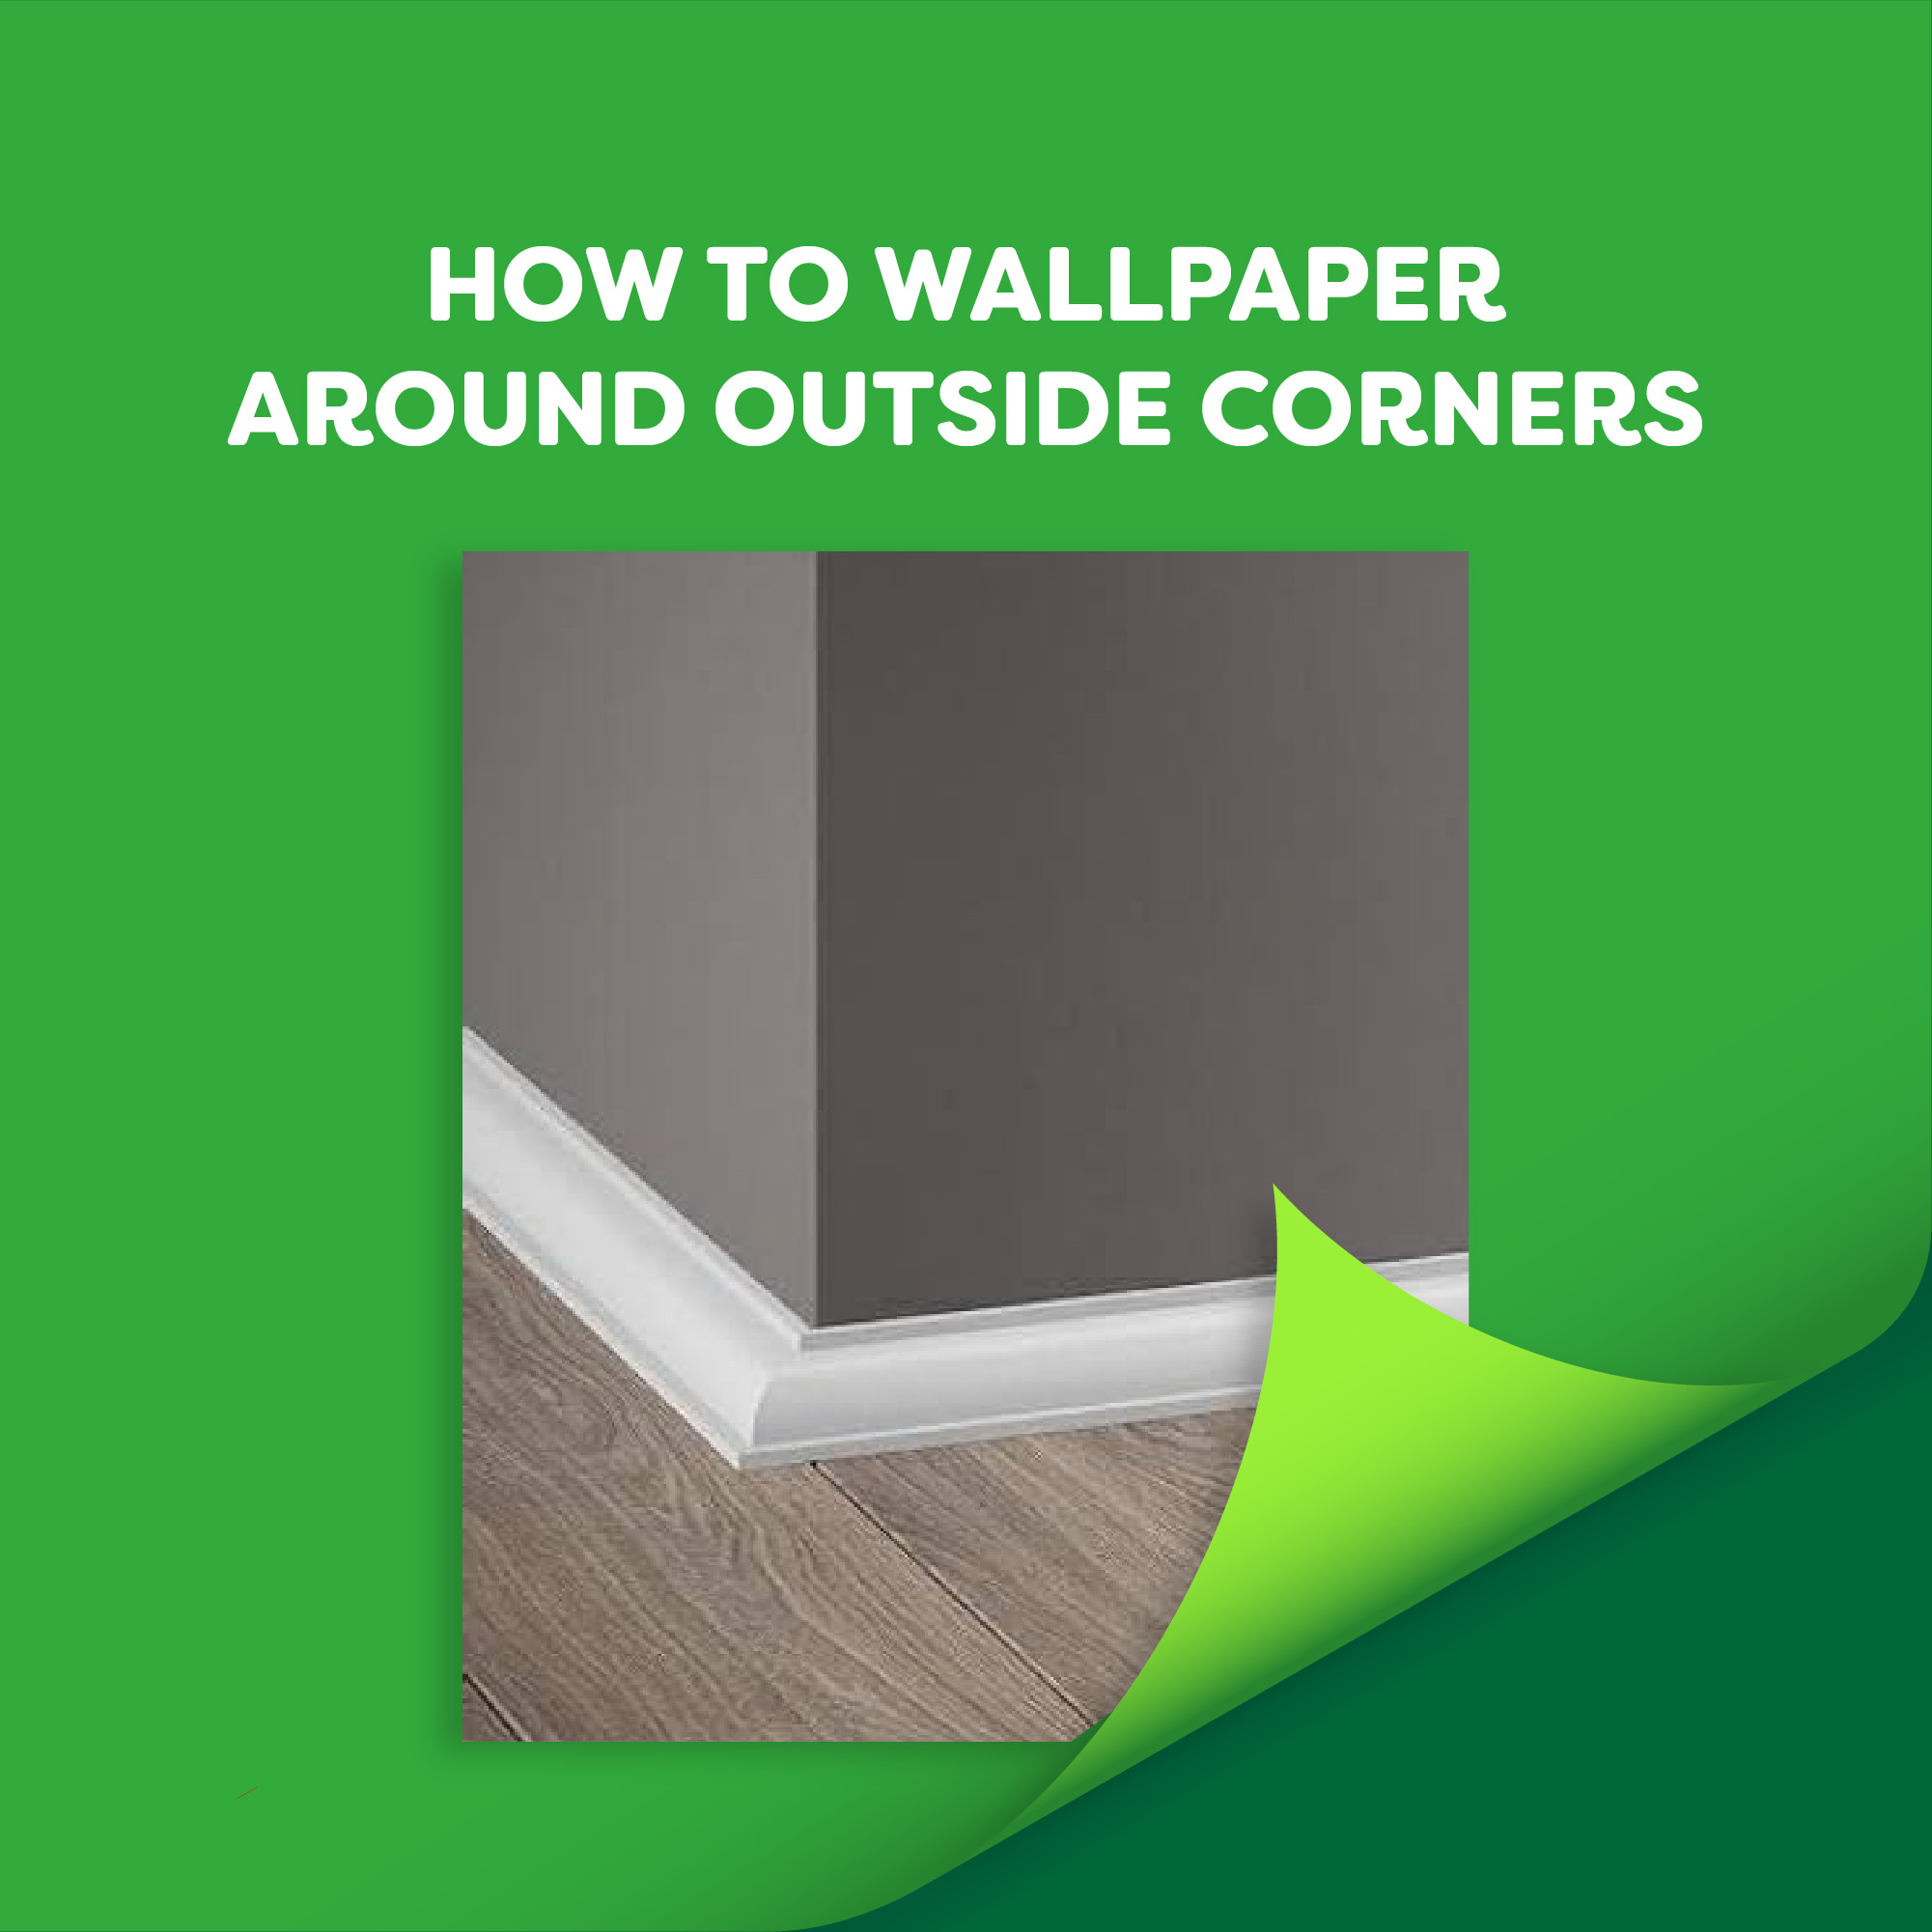 How to Wallpaper Around Outside Corners